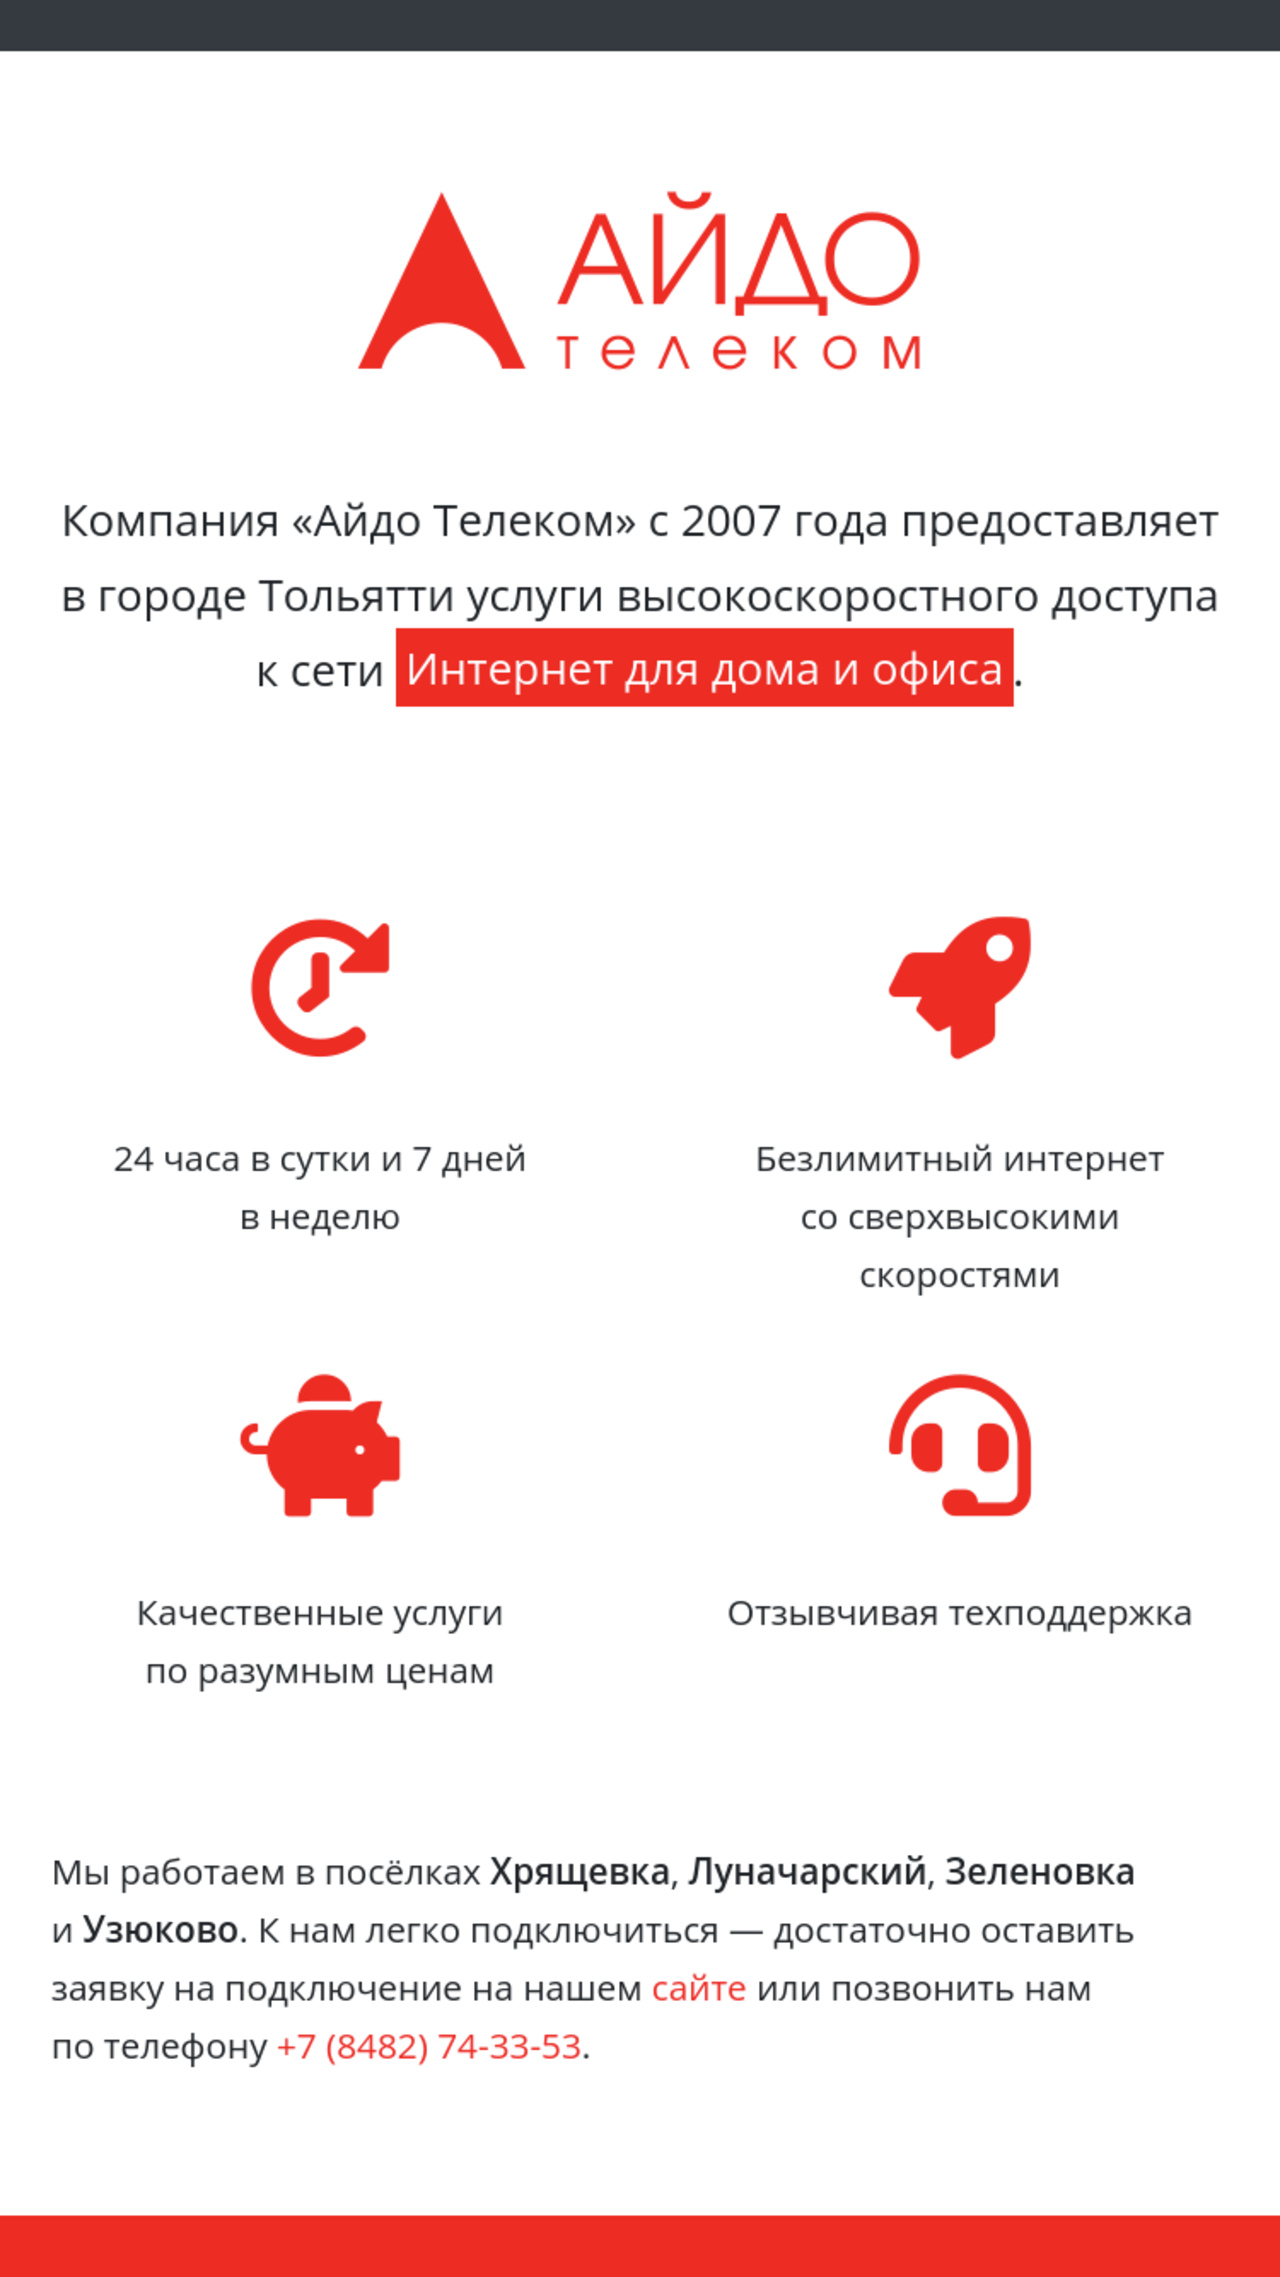 Aido Telecom - Promotional website to support advertising campaign for Povolzhsky district - Slide 7